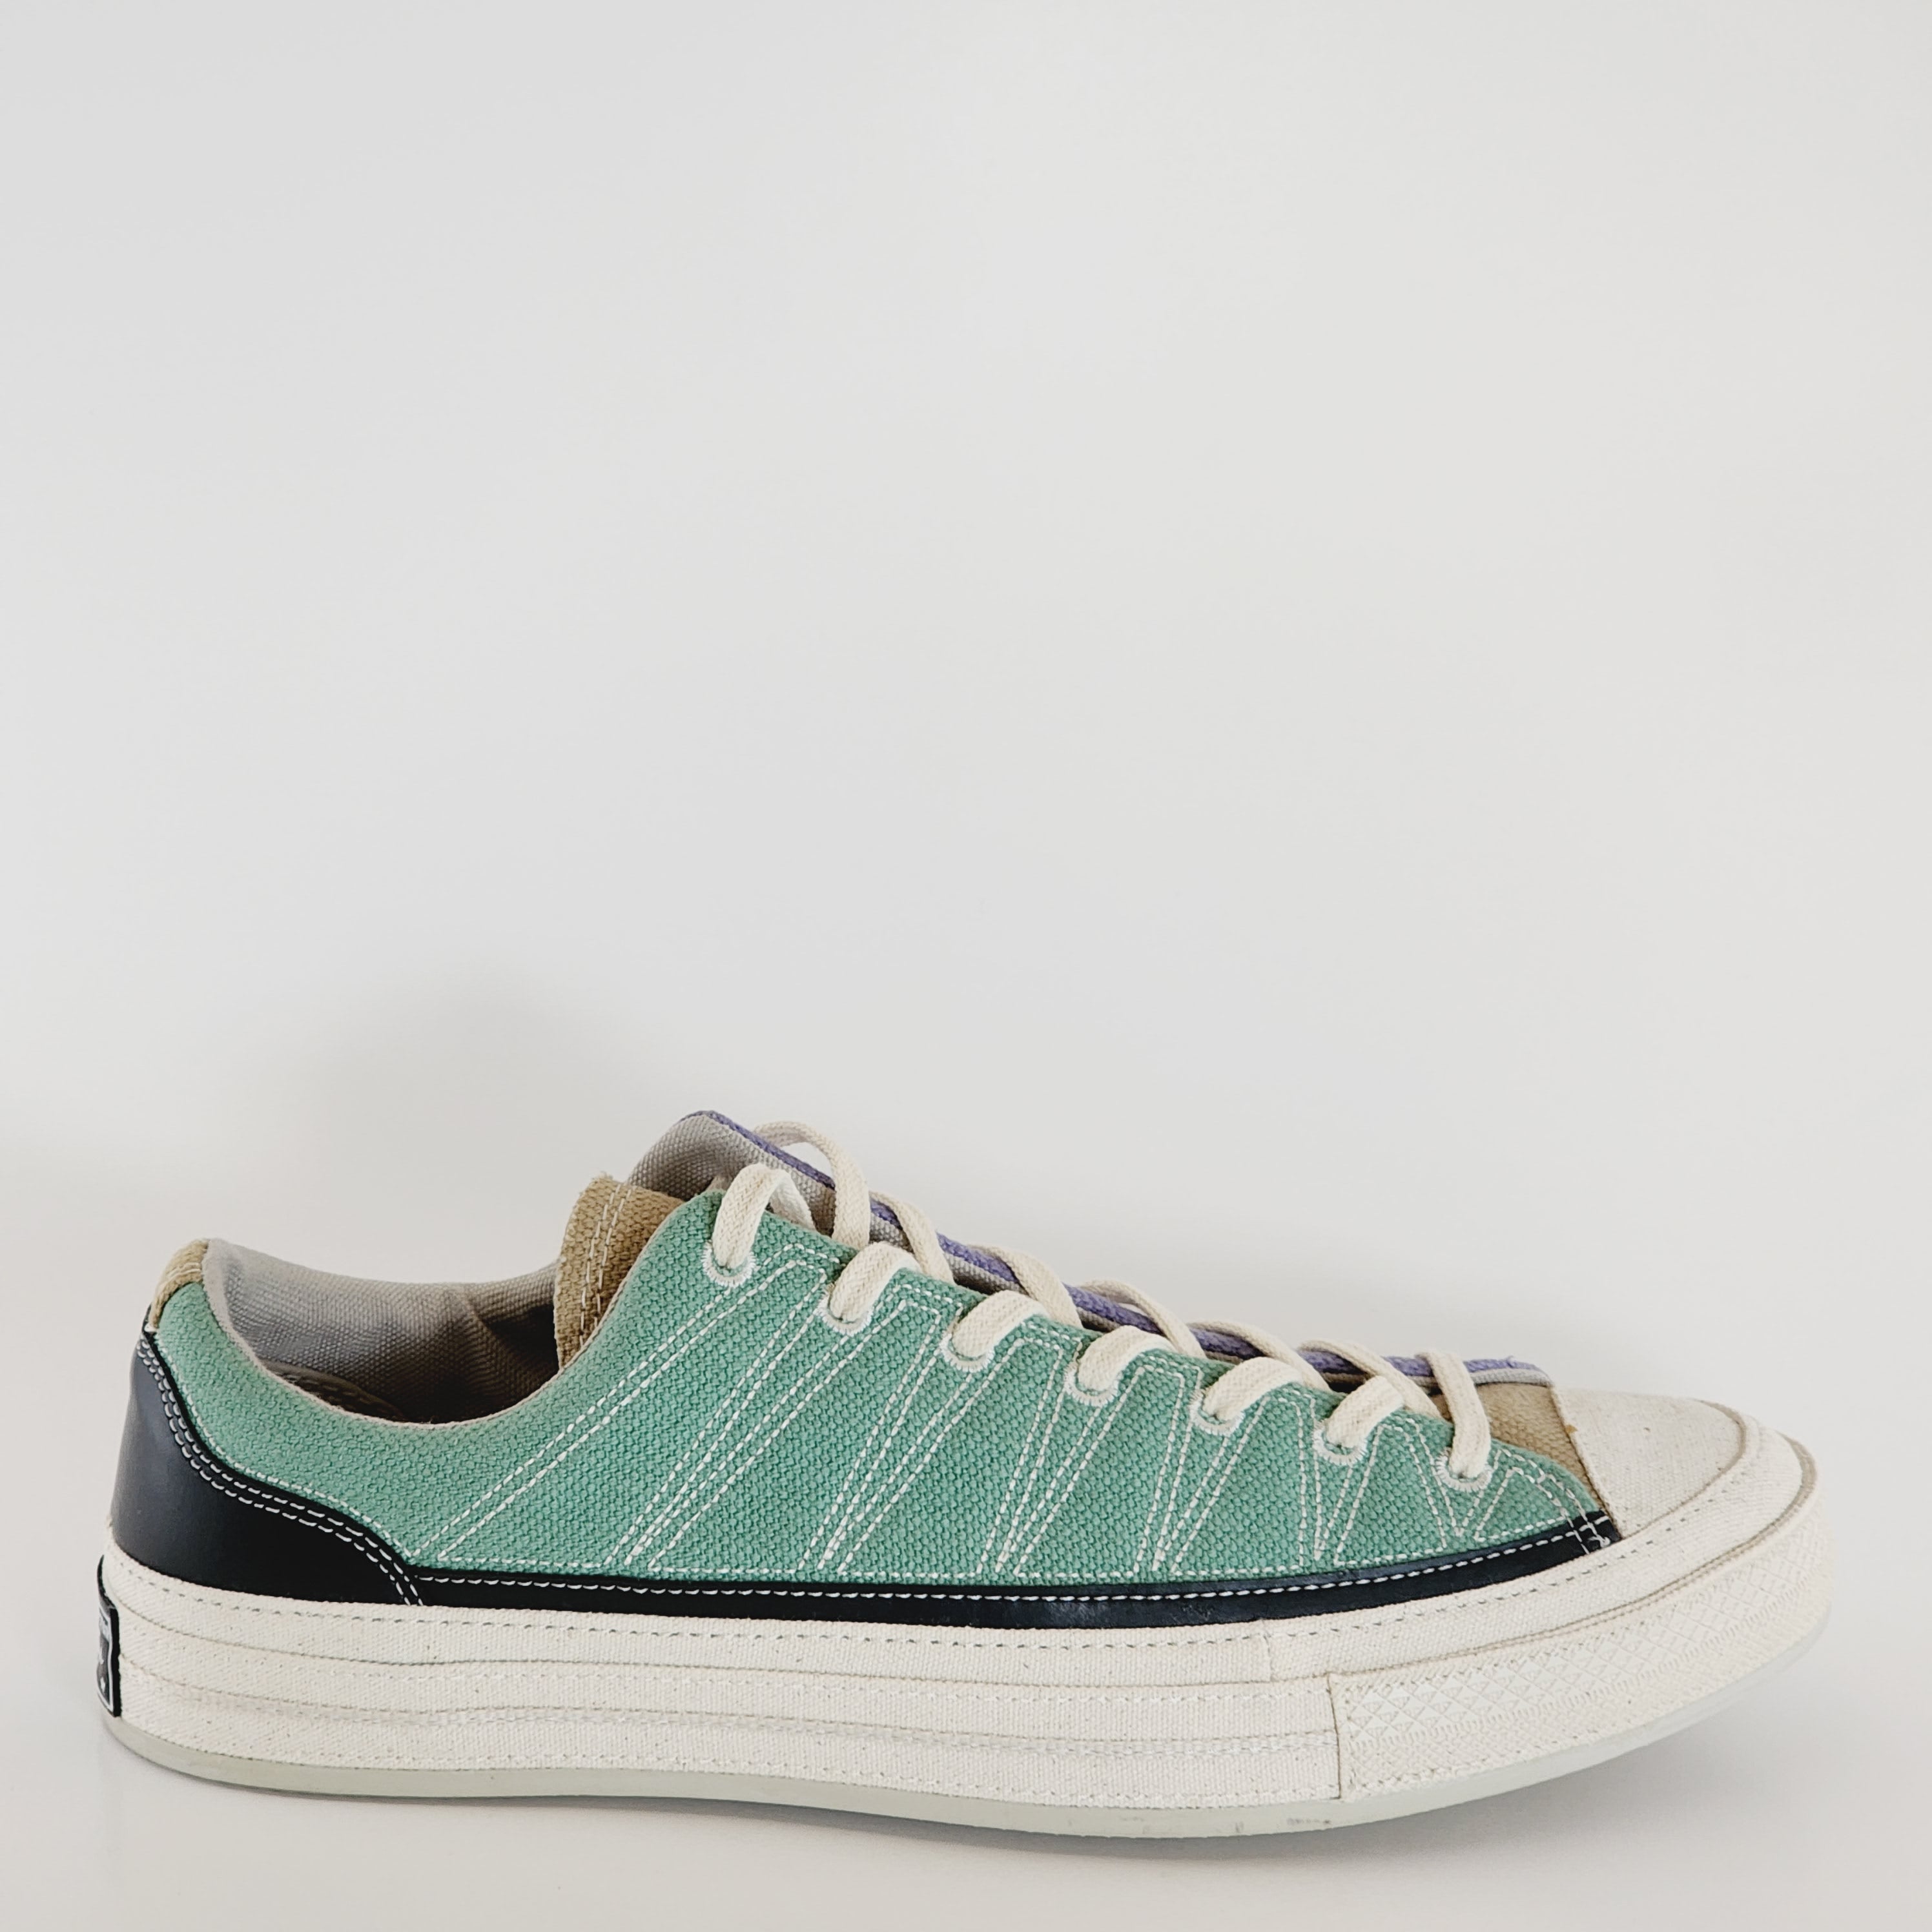 Converse Chuck 70 Low Ox Cozy Granola Cool Sage/Slate Lilac Sneakers 171549C NWT